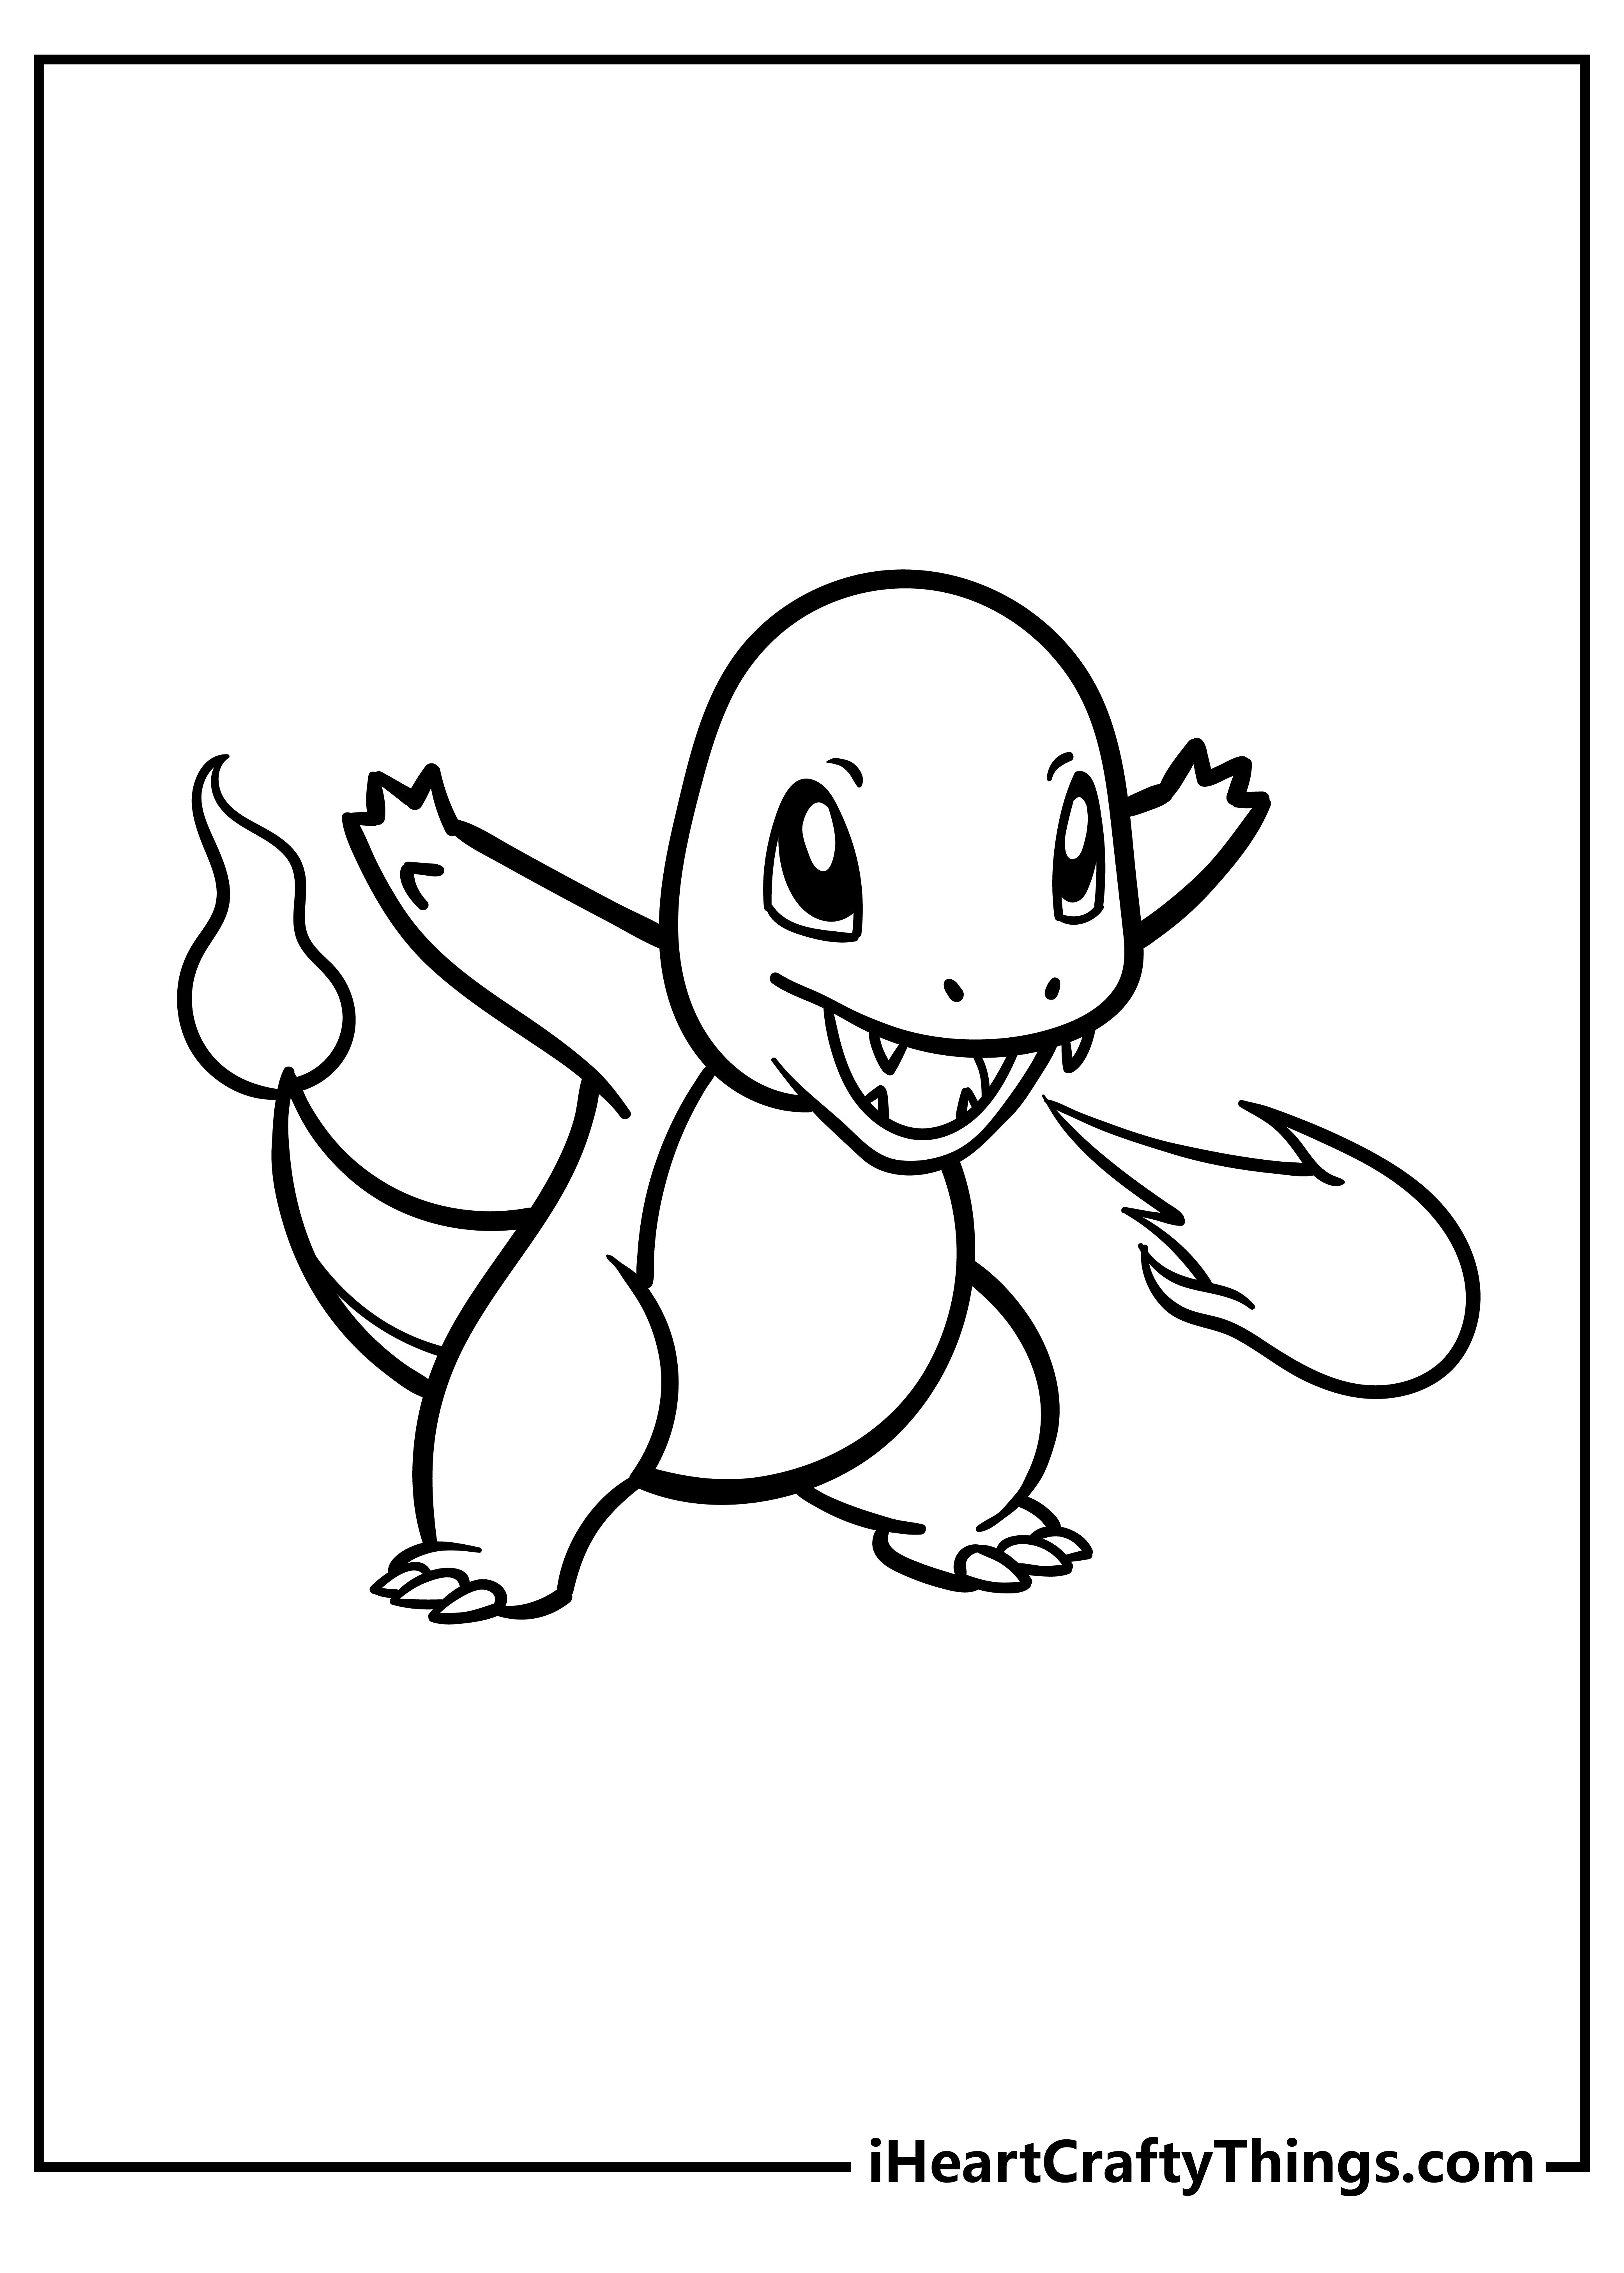 Charmander Coloring Pages for kids free download